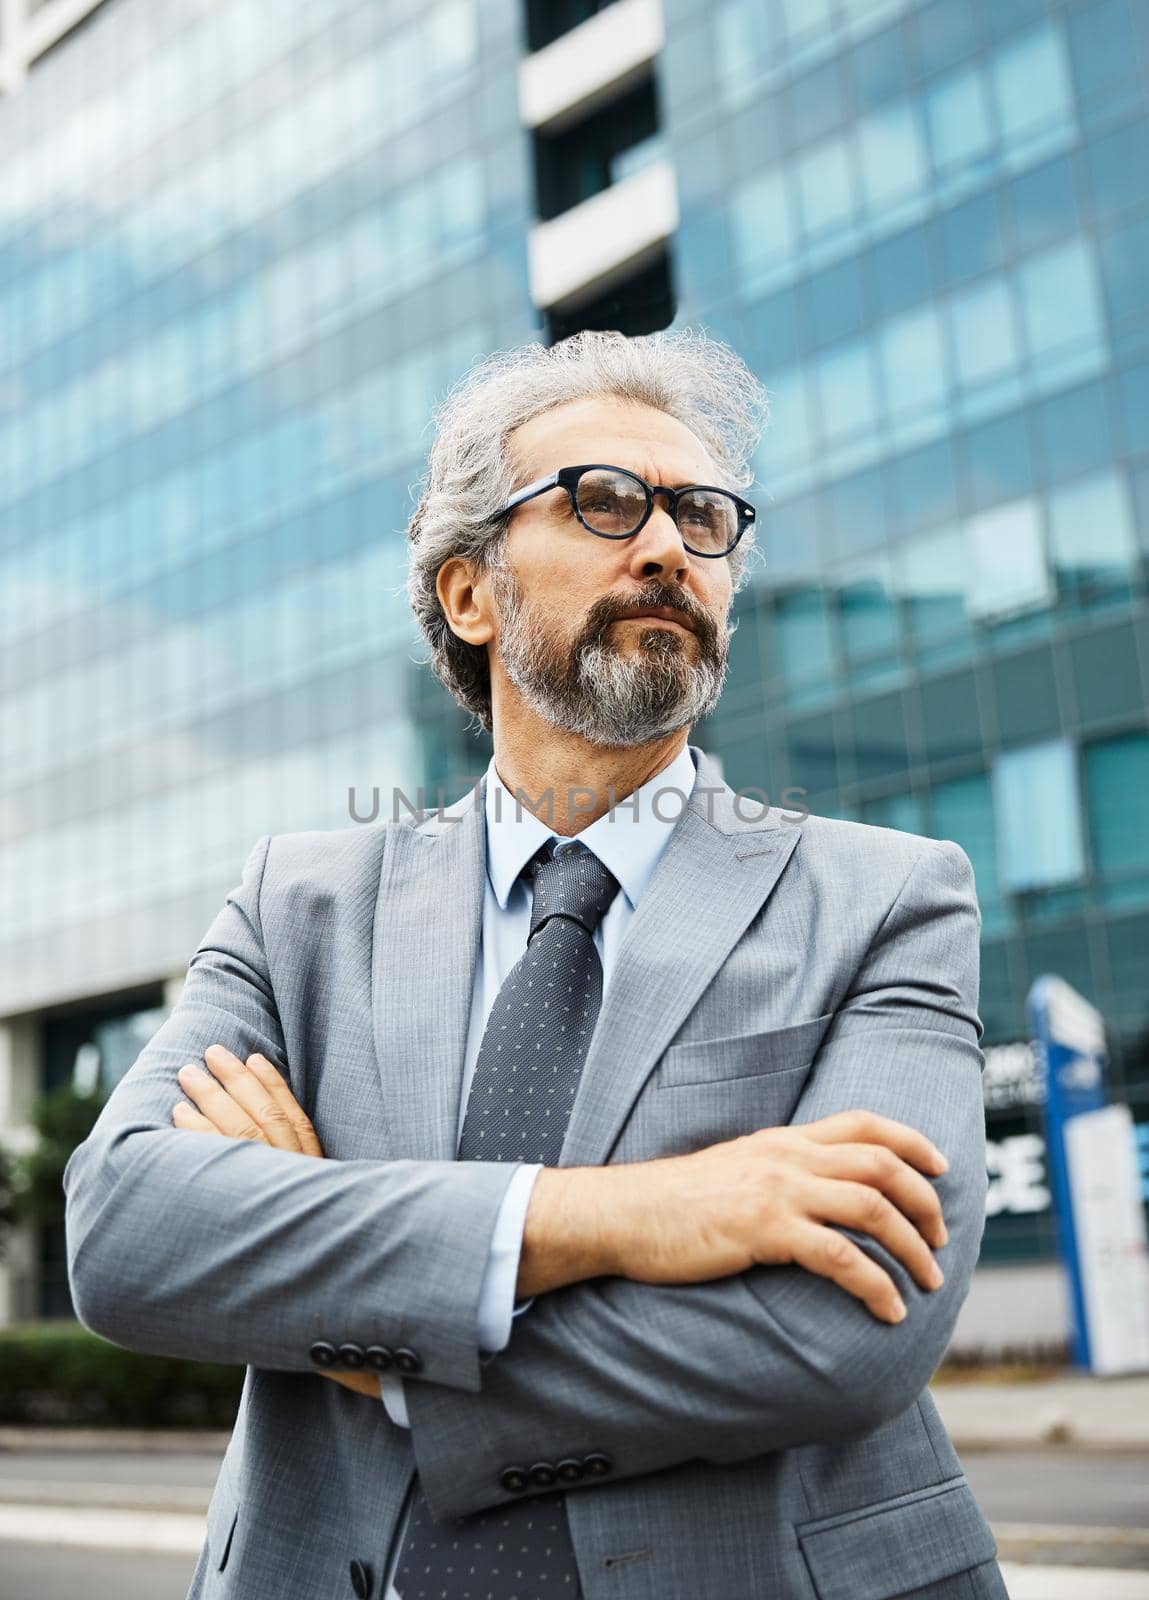 portrait of a senior businessman in front of corporate buildings